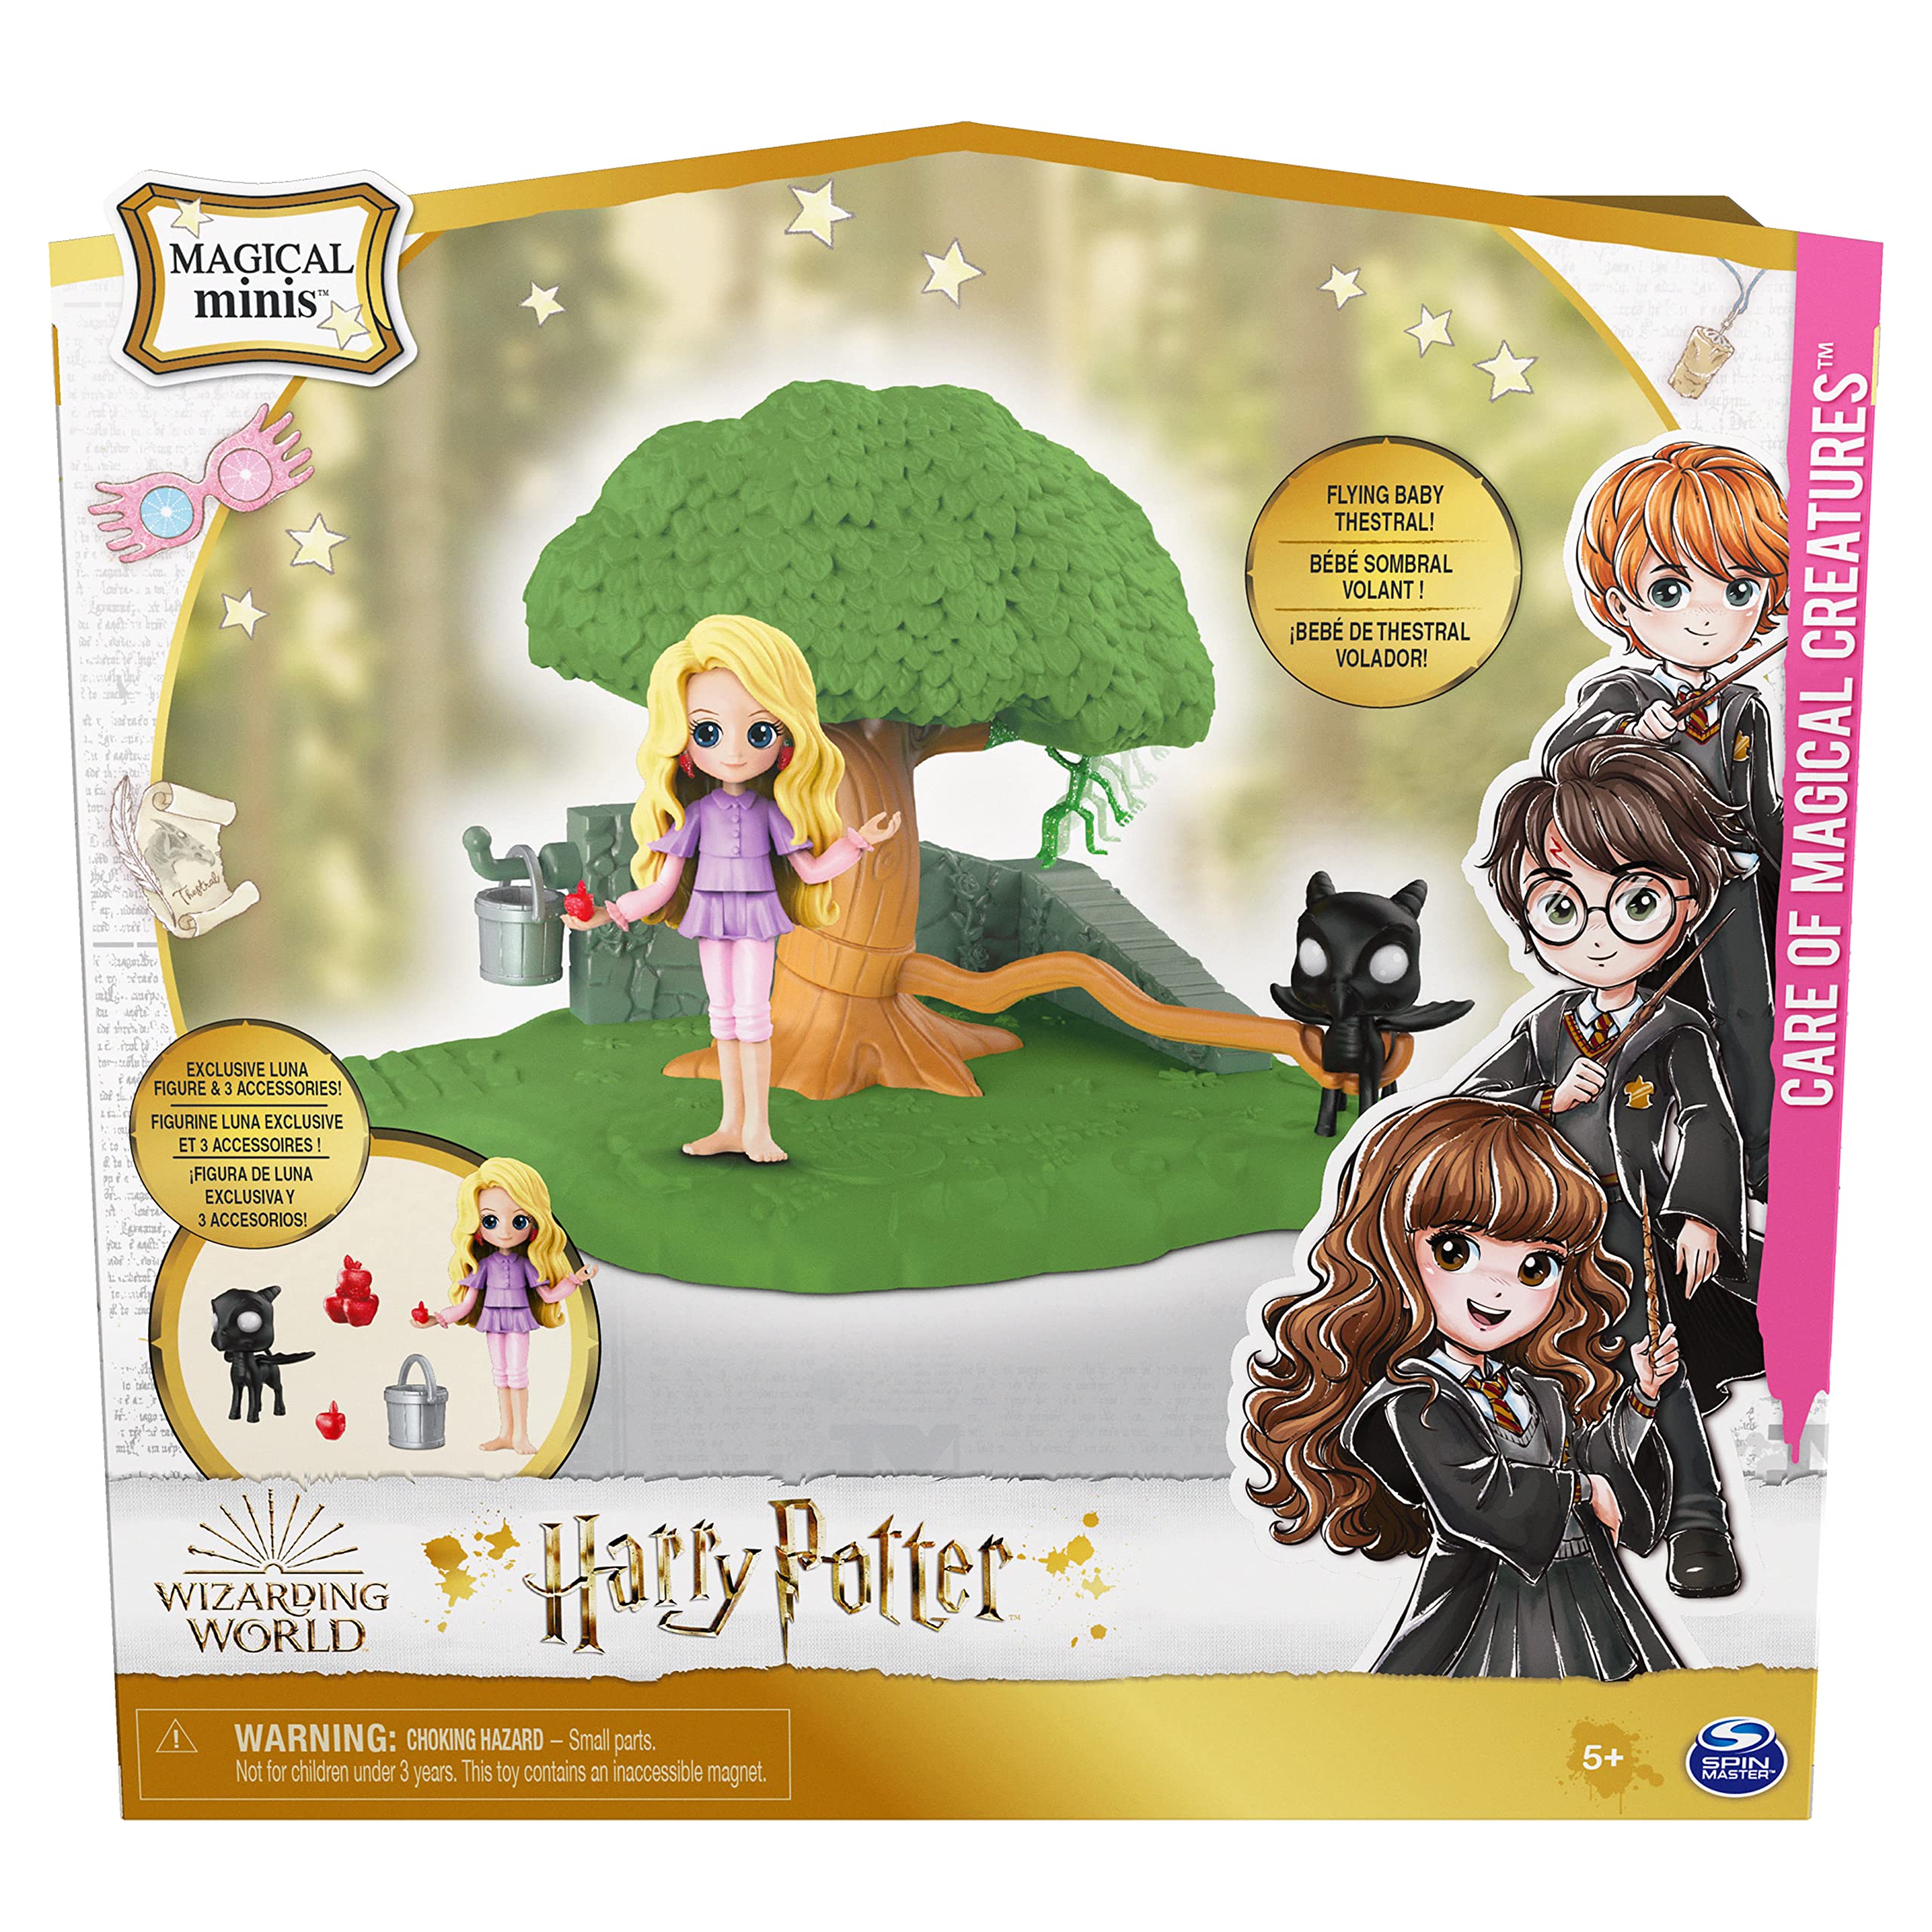 Wizarding World Harry Potter, Magical Minis Care of Magical Creatures with Exclusive Luna Lovegood Figure and Accessories, Kids Toys for Ages 5 and up